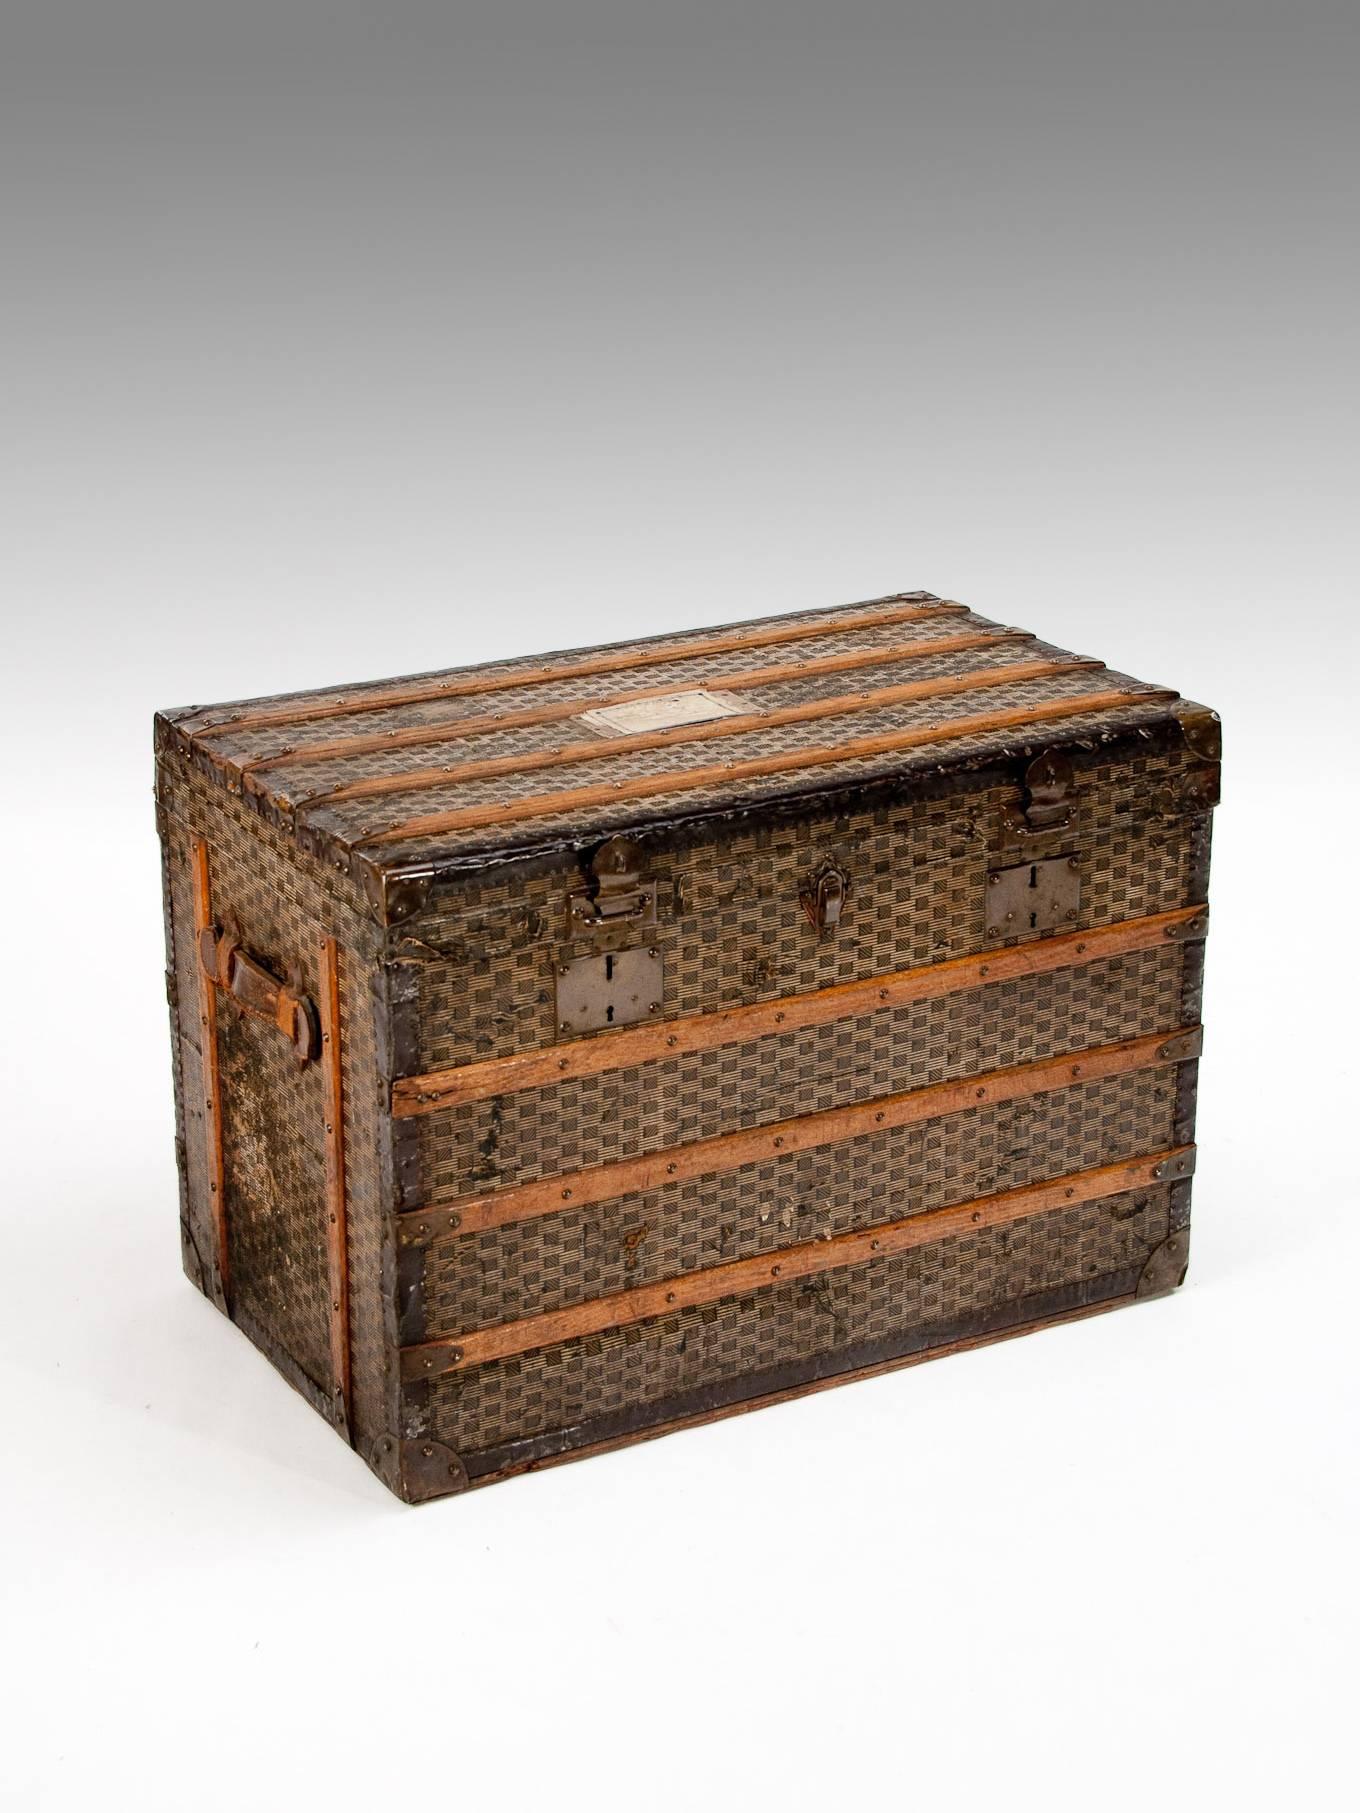 A beautiful and Classic well sized antique French steamer trunk with the locks stamped Paris F.A.M.
In very much the Goyard manner this turn of the century travelling luggage or trunk has a monogrammed cover with a wooden strapping surround being